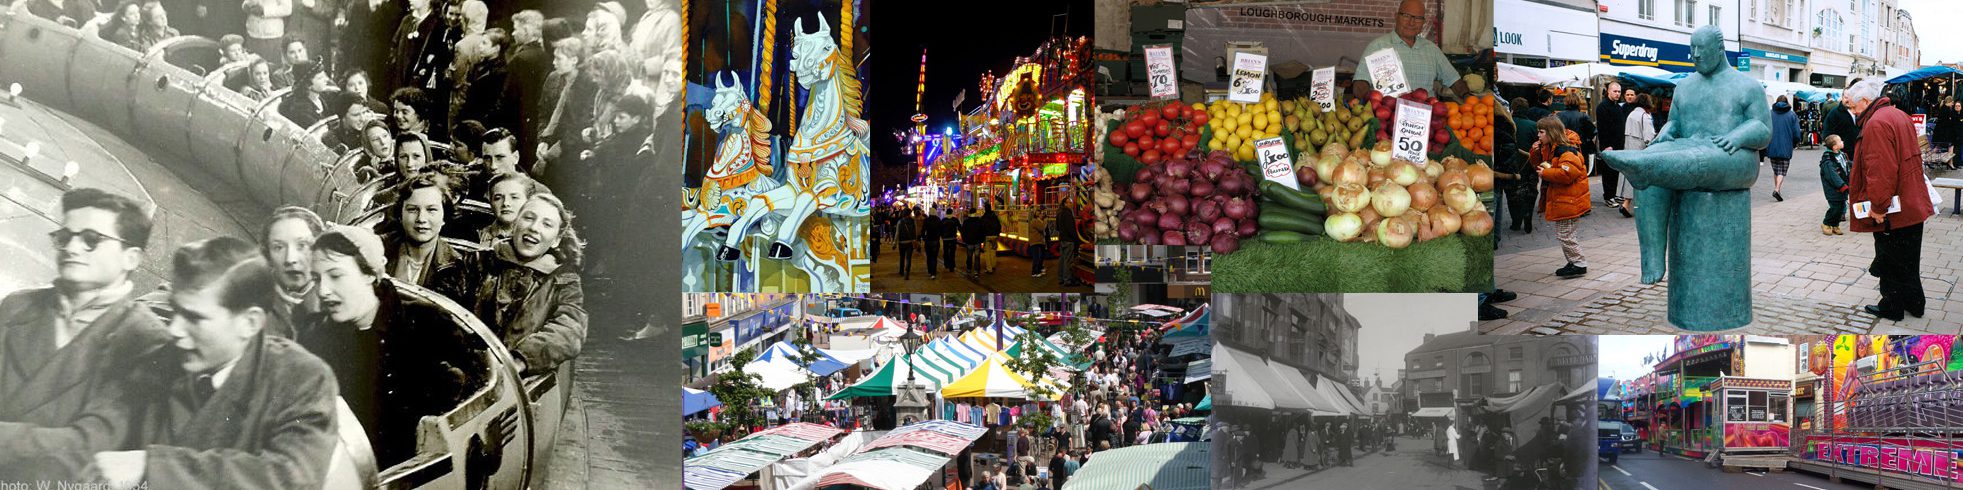 Collage banner featuring pictures of Loughborough market and fair. Including photos of: fruit stall. carousel. black and white photos of market stalls and fair rides.